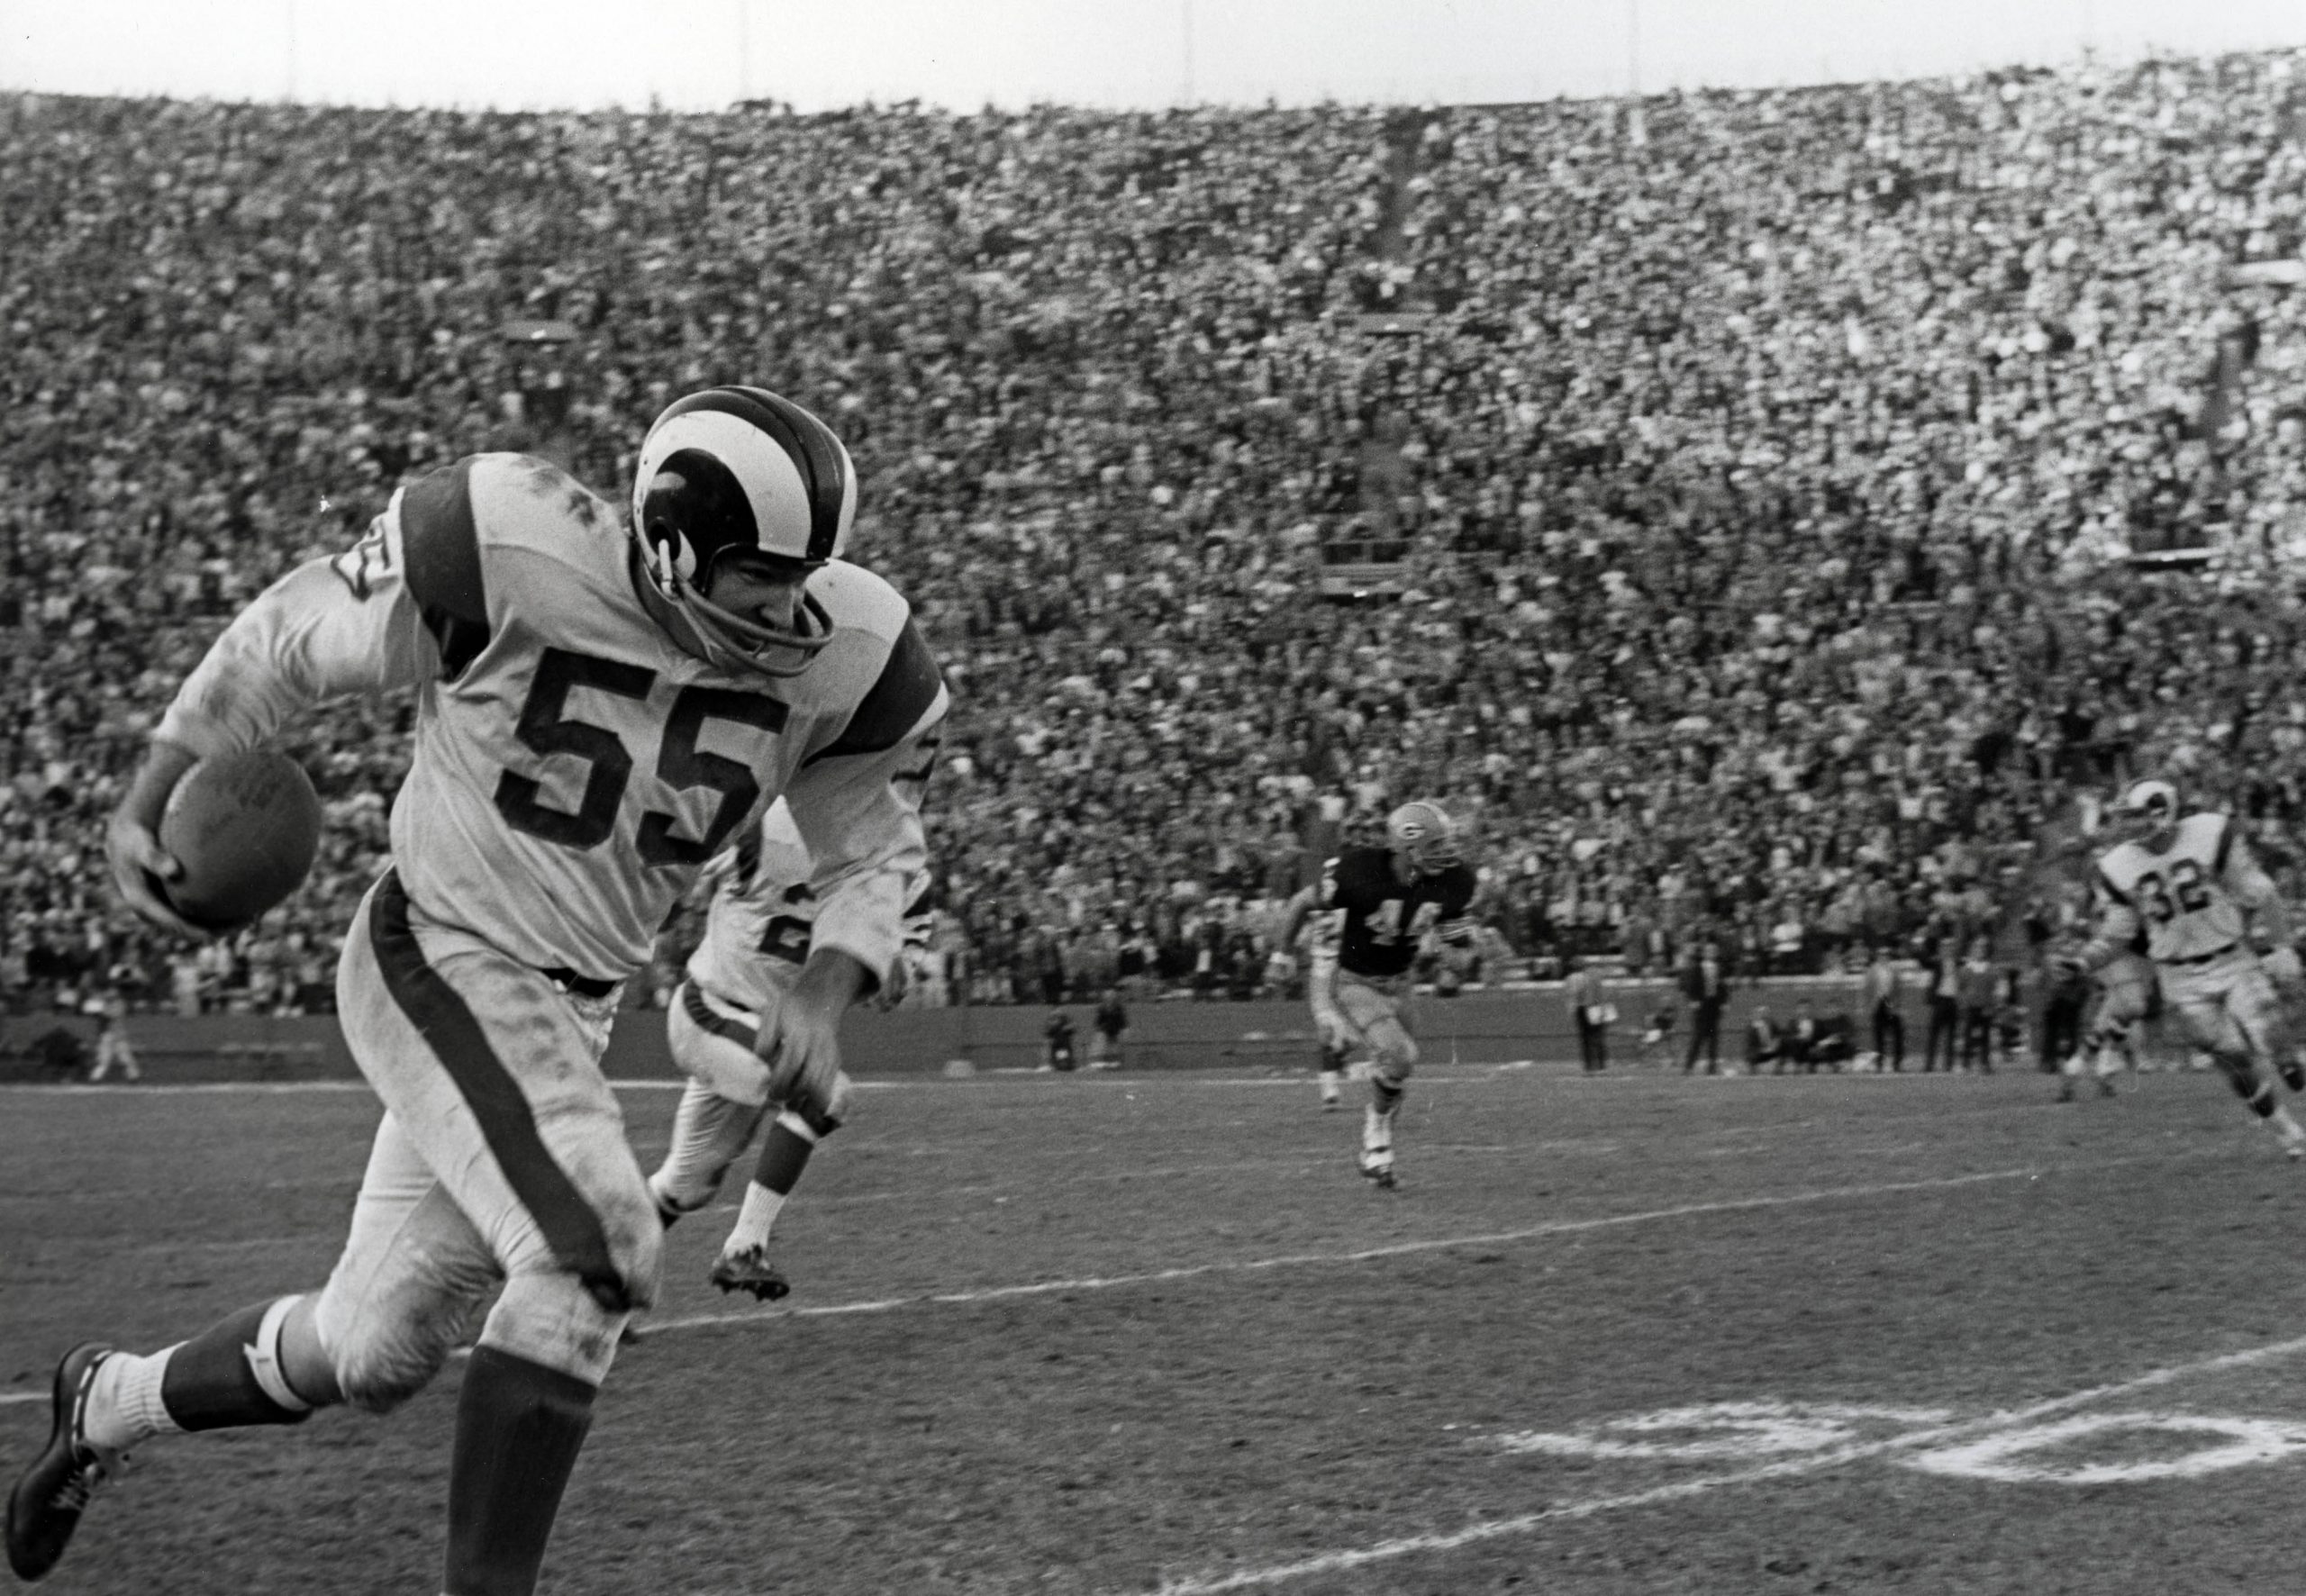 US PRESSWIRE Sports-Historical Dec 9, 1967 Los Angeles, CA, USA FILE PHOTO Los Angeles Rams linebacker Maxie Baughan 55 running the ball after an interception against the Green Bay Packers at Los Angeles Memorial Coliseum during the 1967 season. Los Angeles California USA, EDITORIAL USE ONLY PUBLICATIONxINxGERxSUIxAUTxONLY Copyright: xDavidxBoss-USAxTODAYxSportsx 6690676